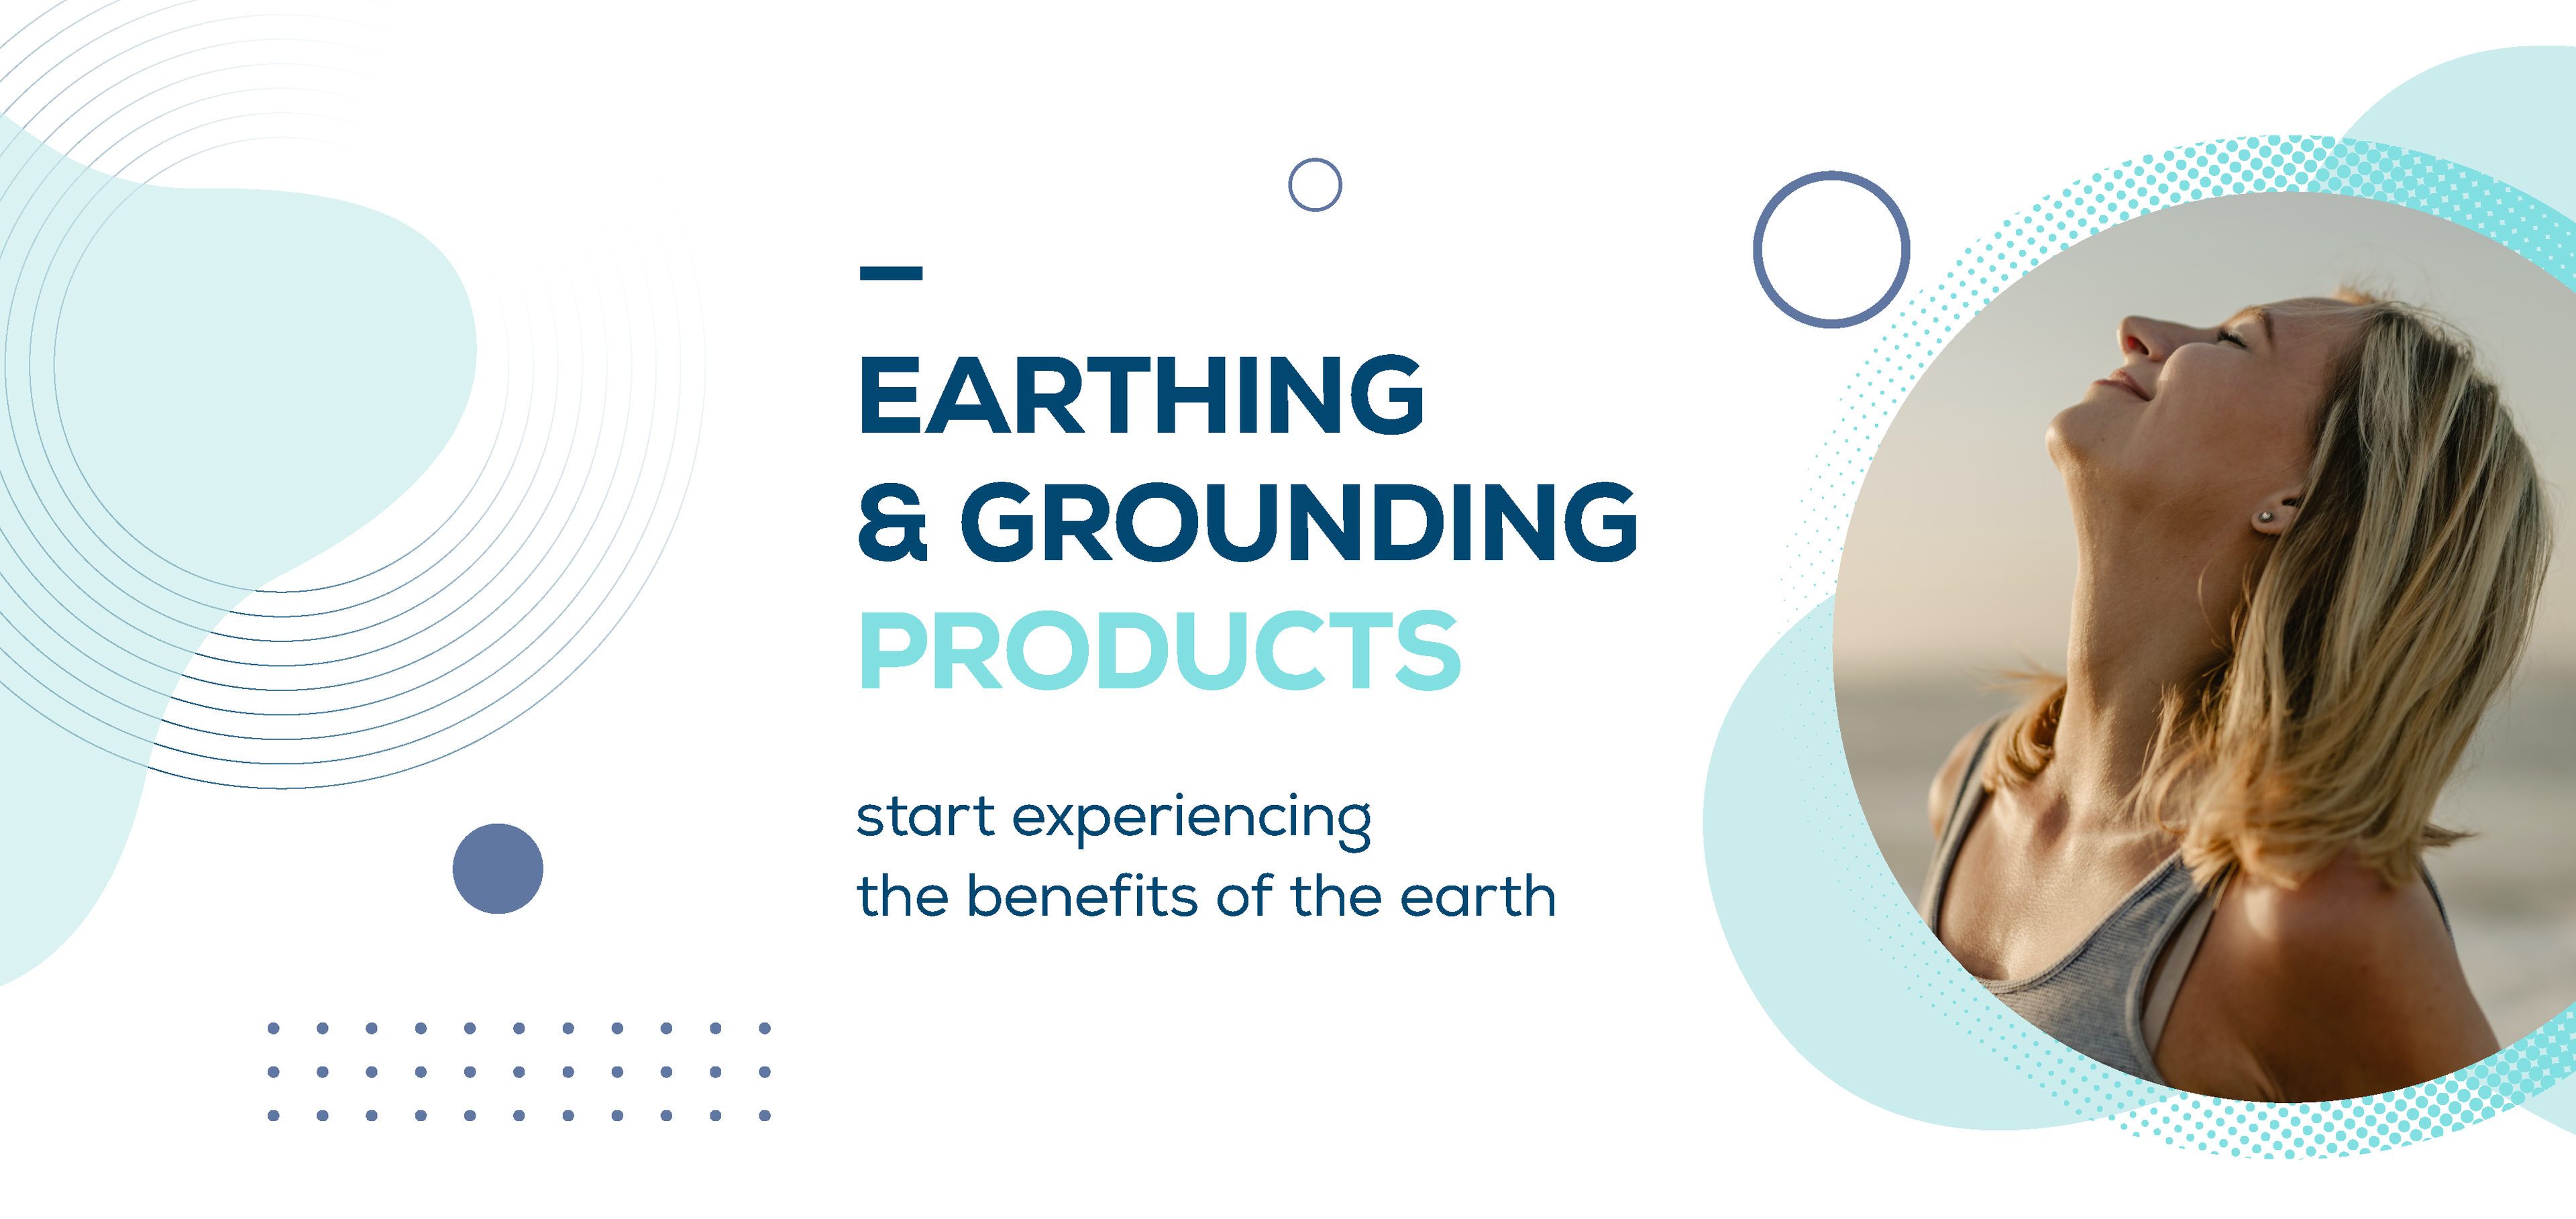 Earthing and grounding products official online store.